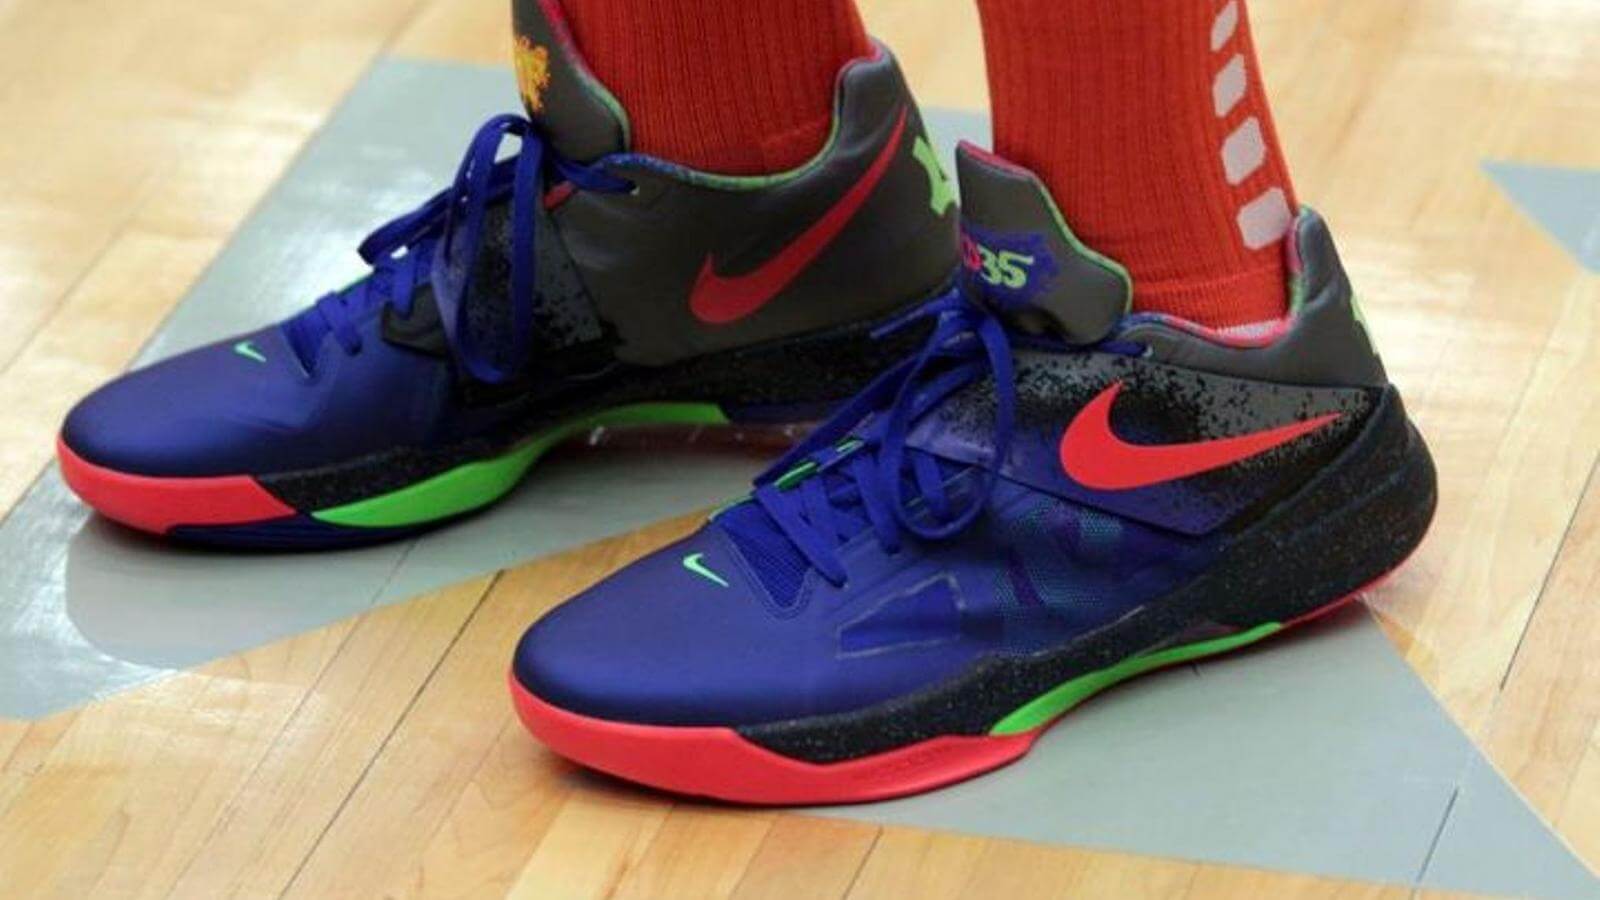 Best Kevin Durant Basketball Shoes 12 Shoes starting from 89.97